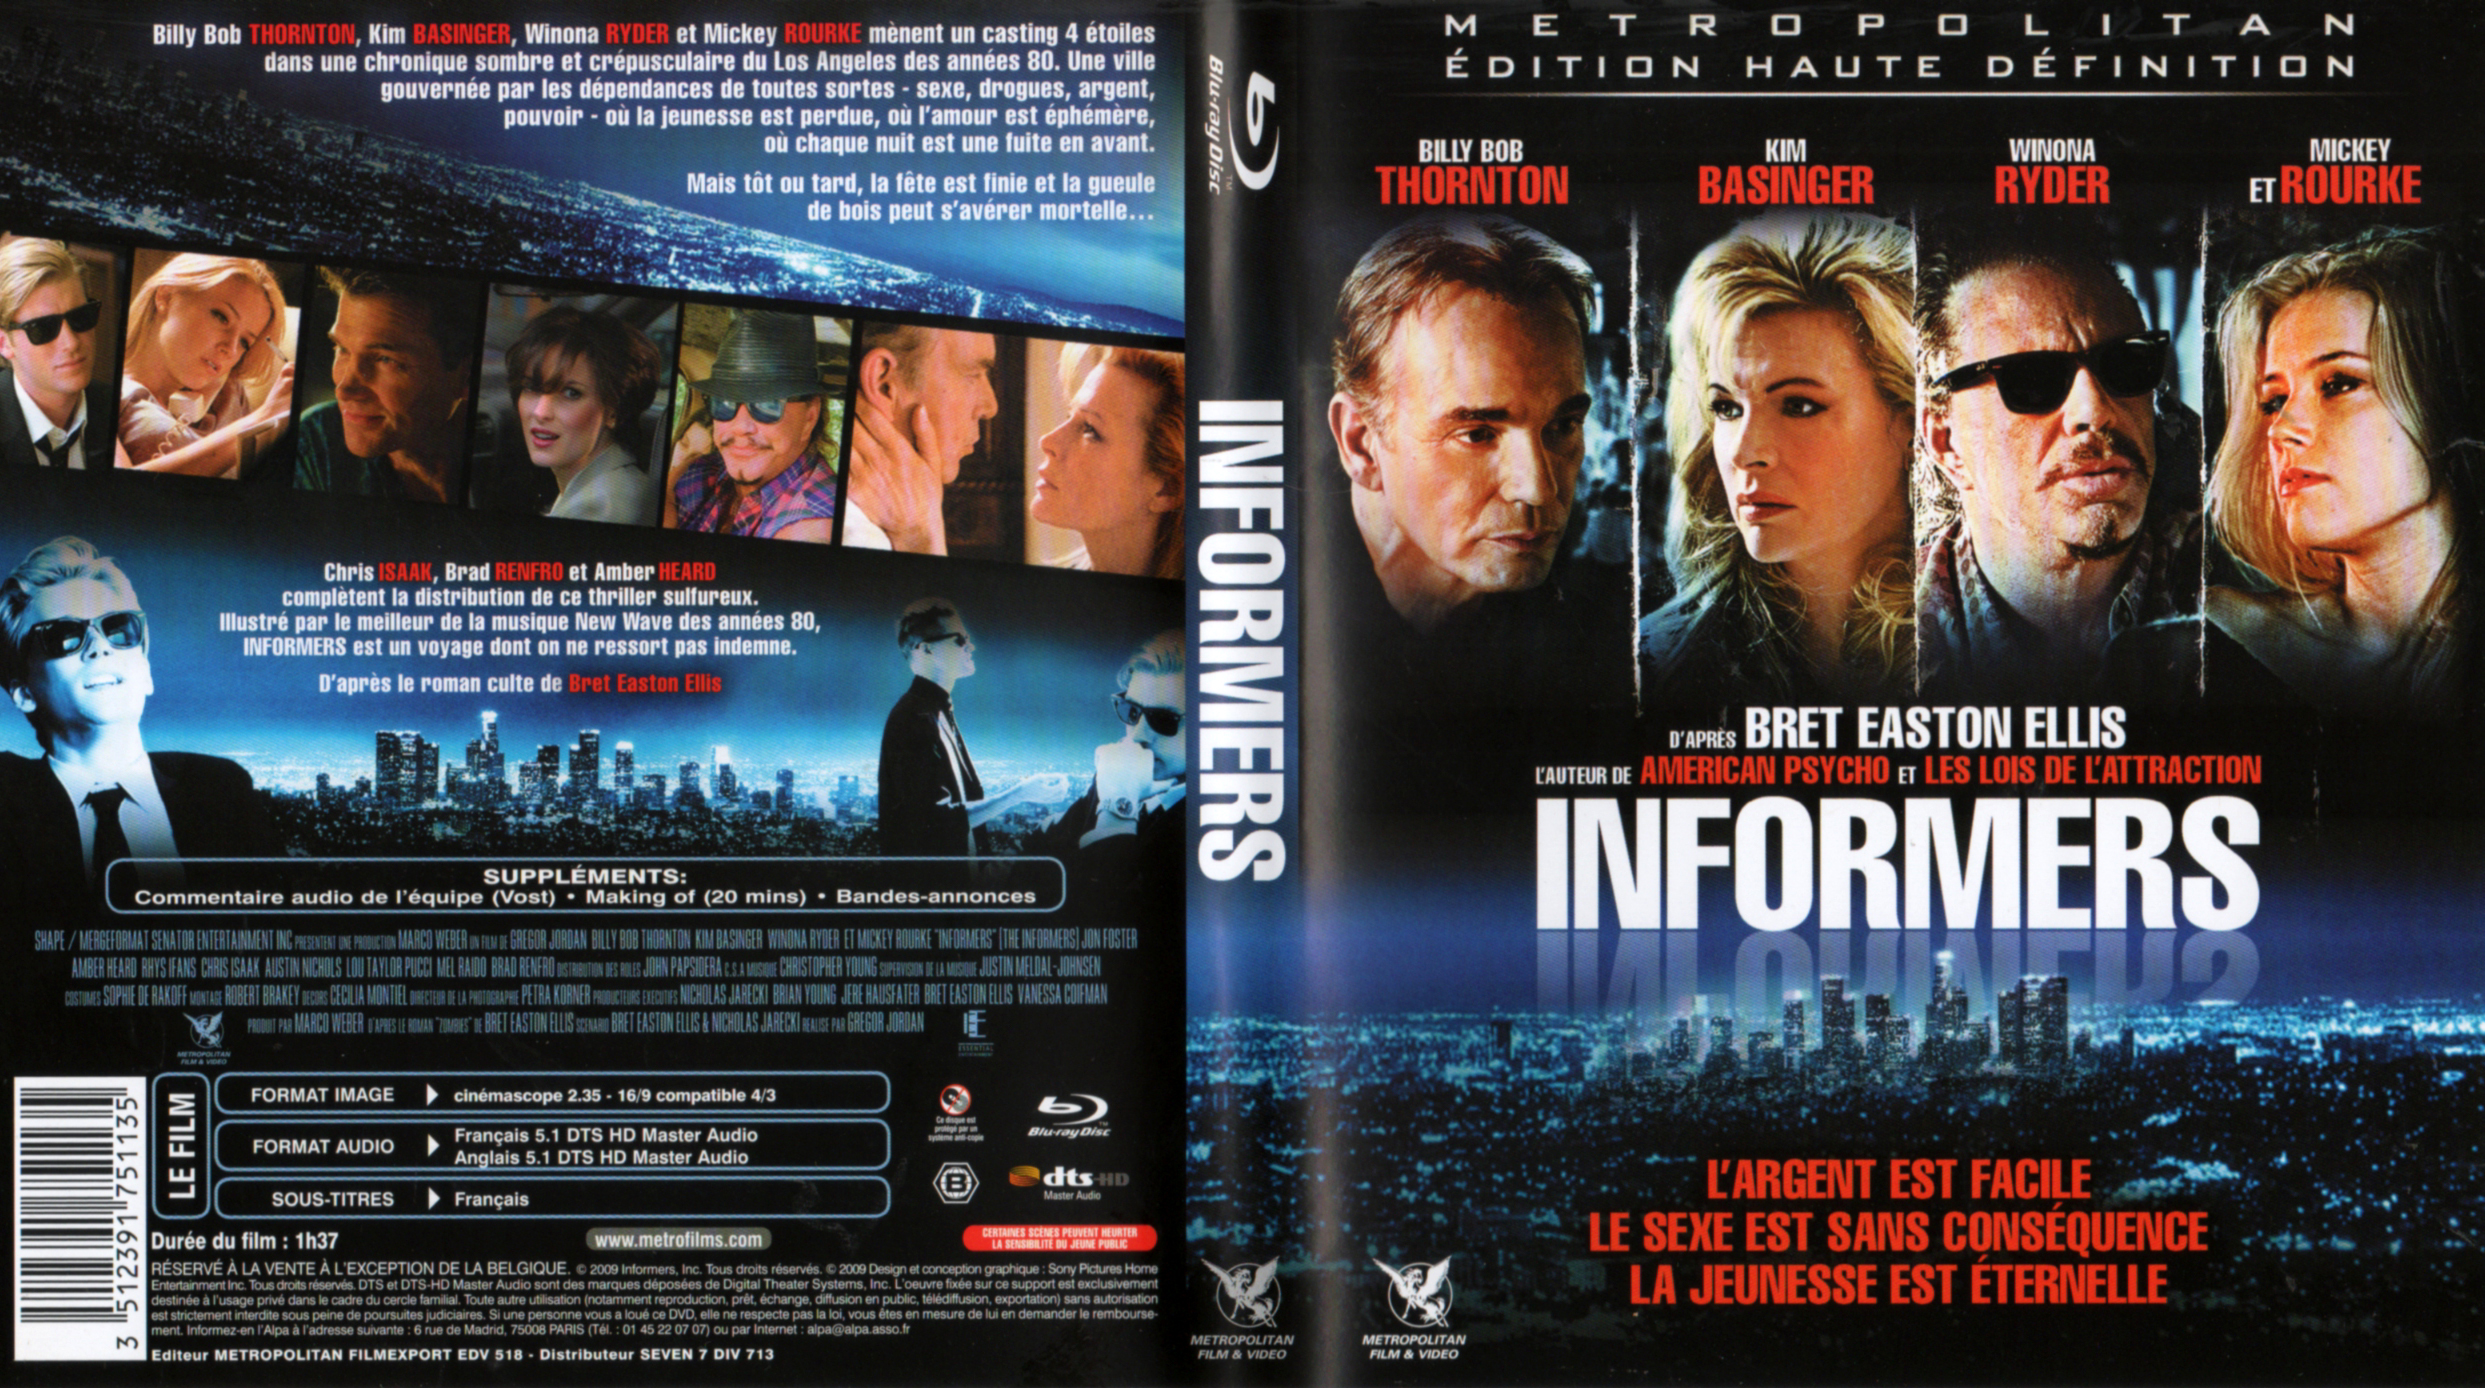 Jaquette DVD Informers (BLU-RAY)